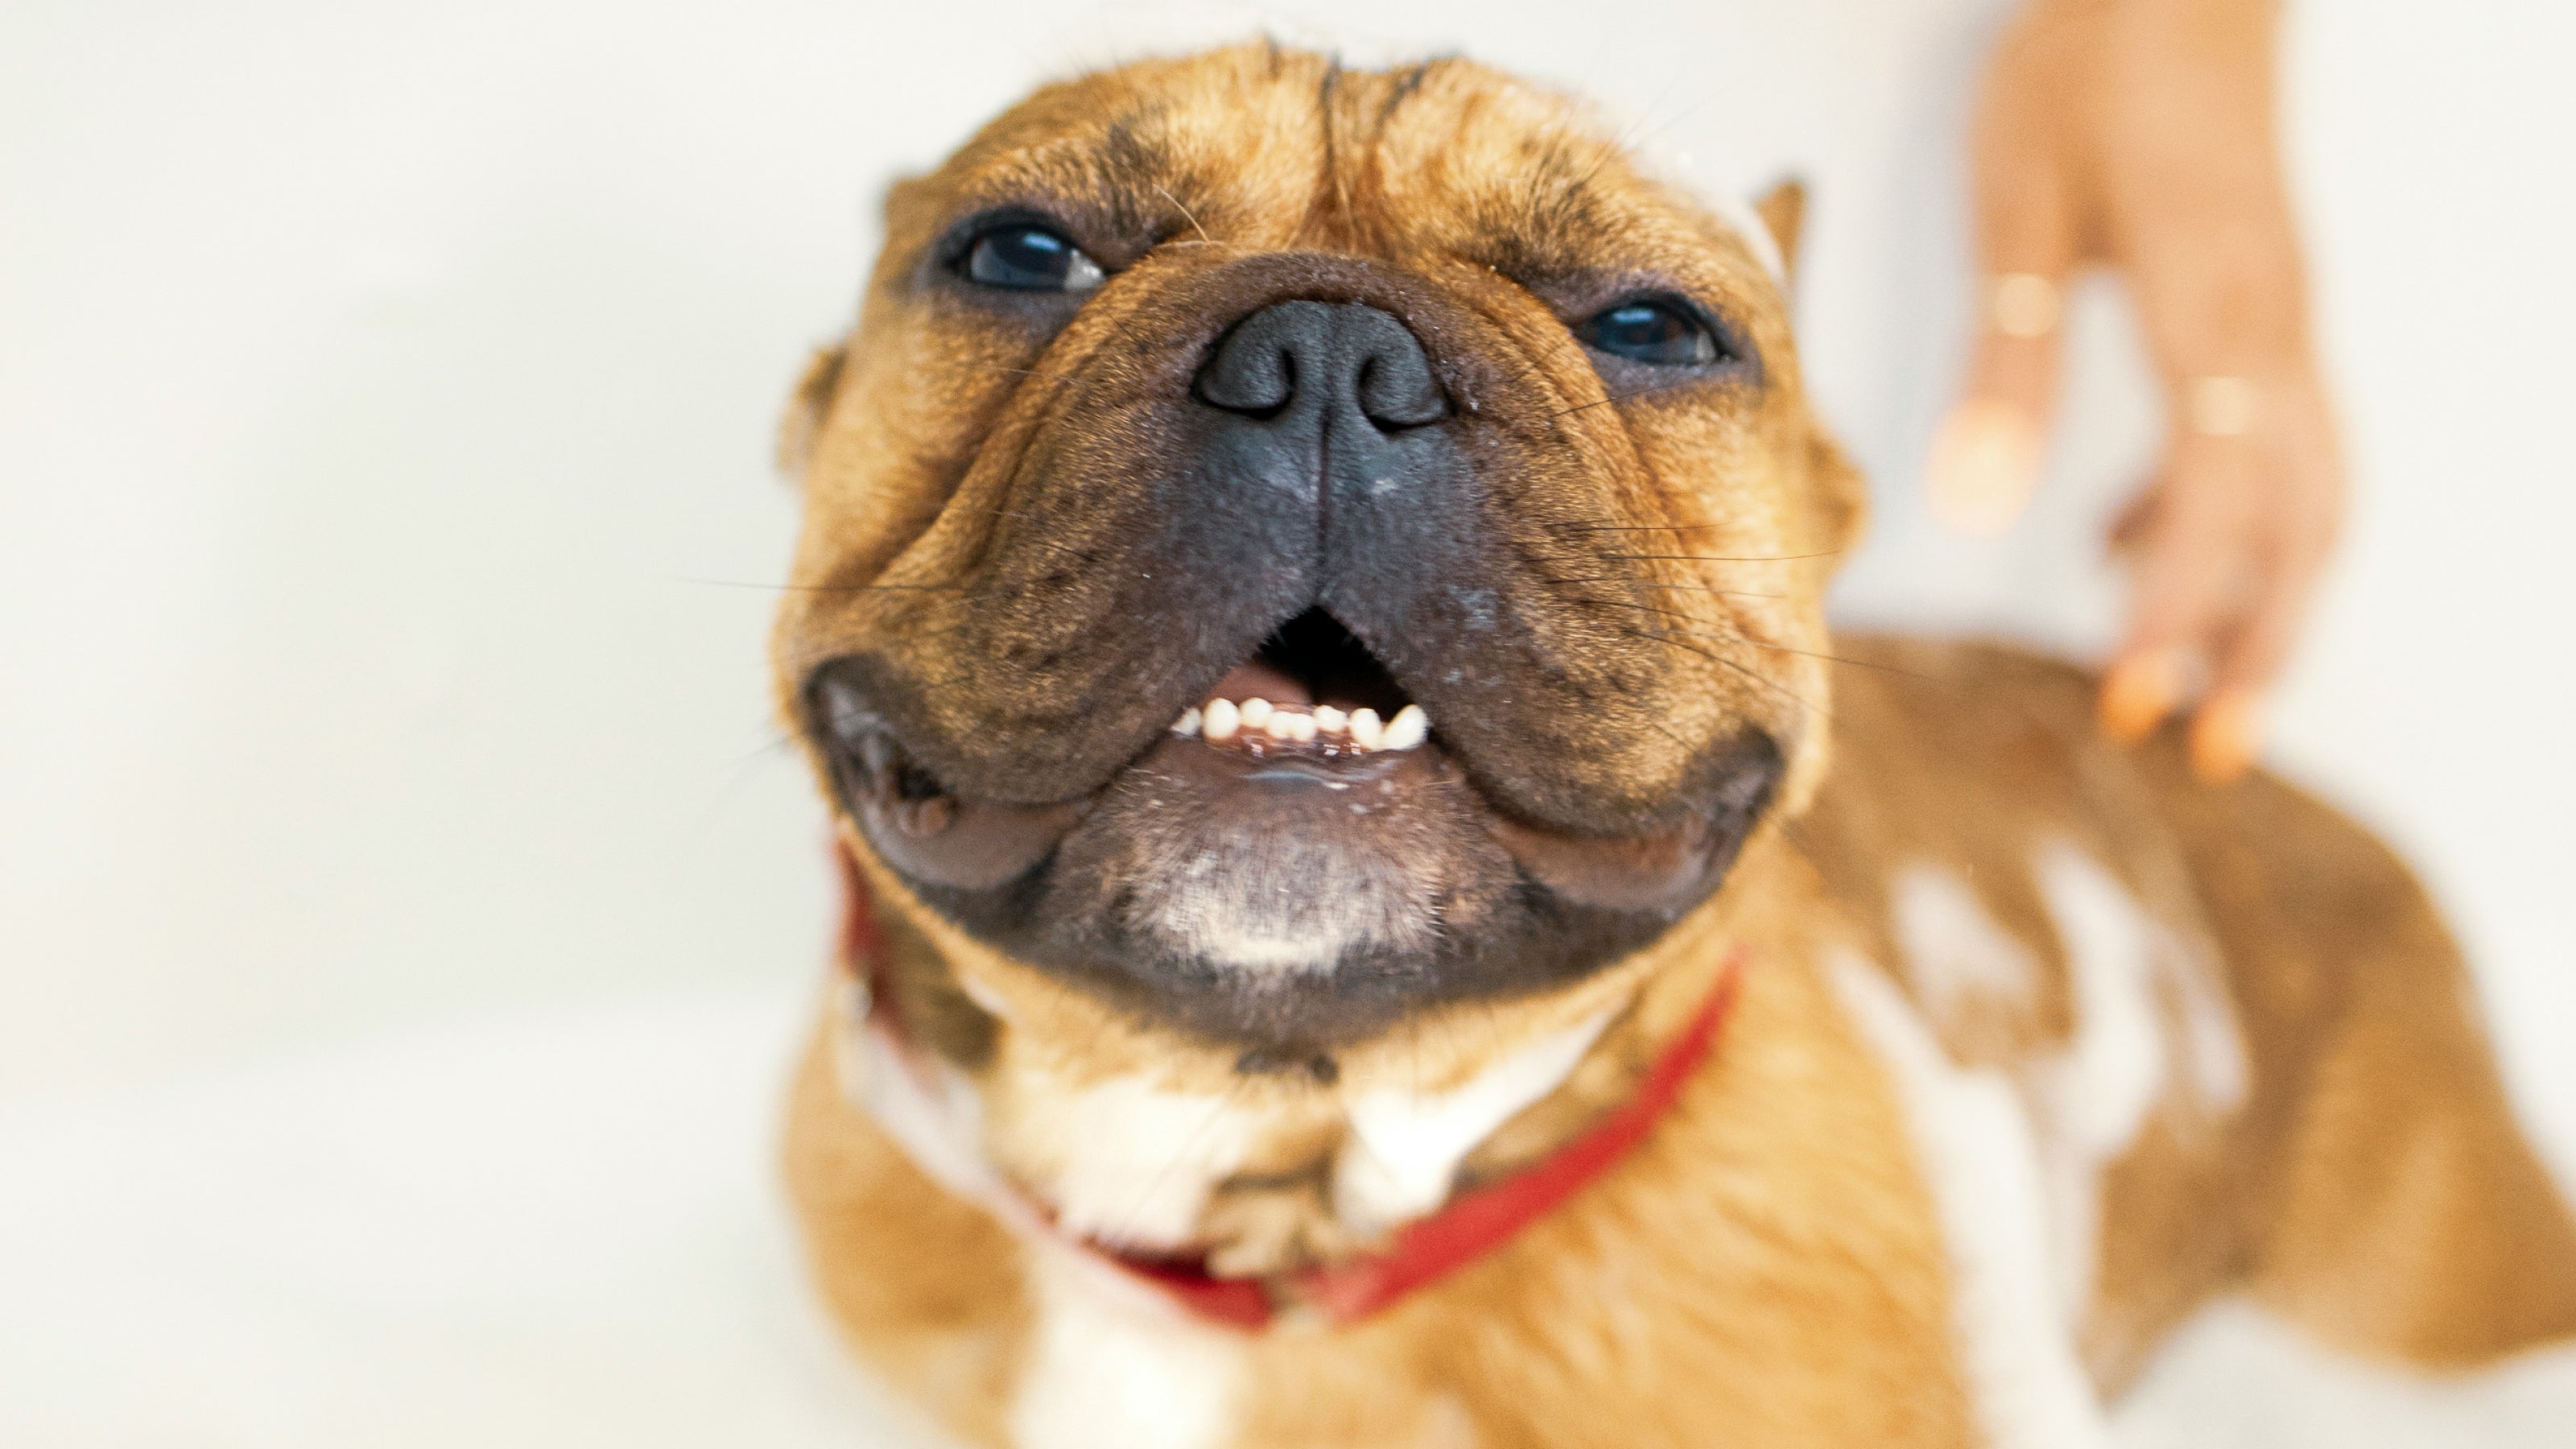 A brown dog wearing a red collar smiles as they get a bath